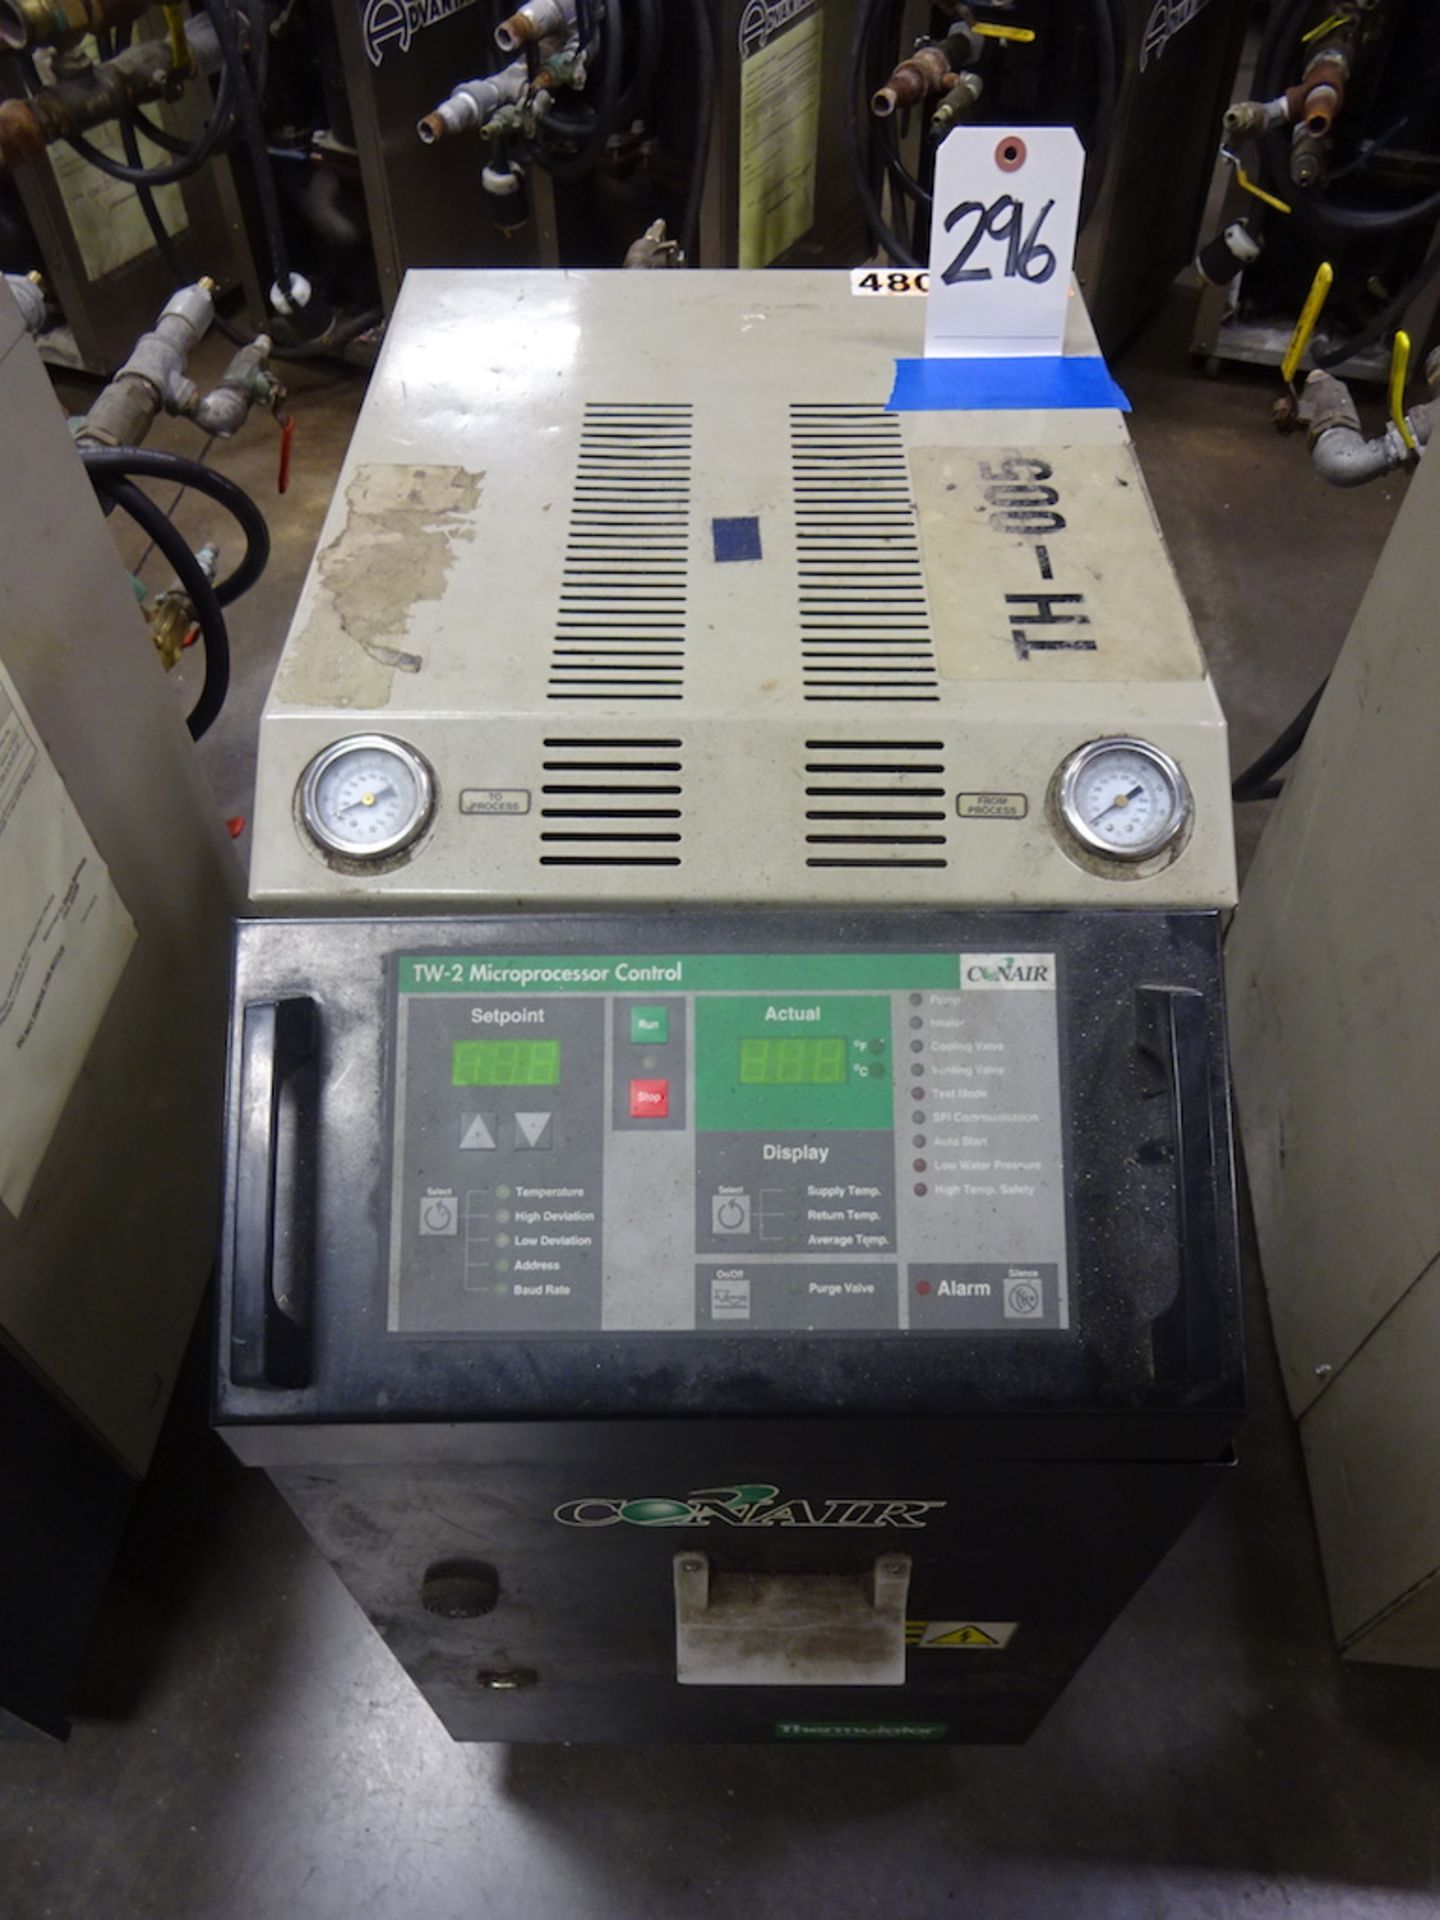 Conair Model TW-2 Thermolator Temperature Controller, S/N 120564, with TW-2 Microprocessor Control